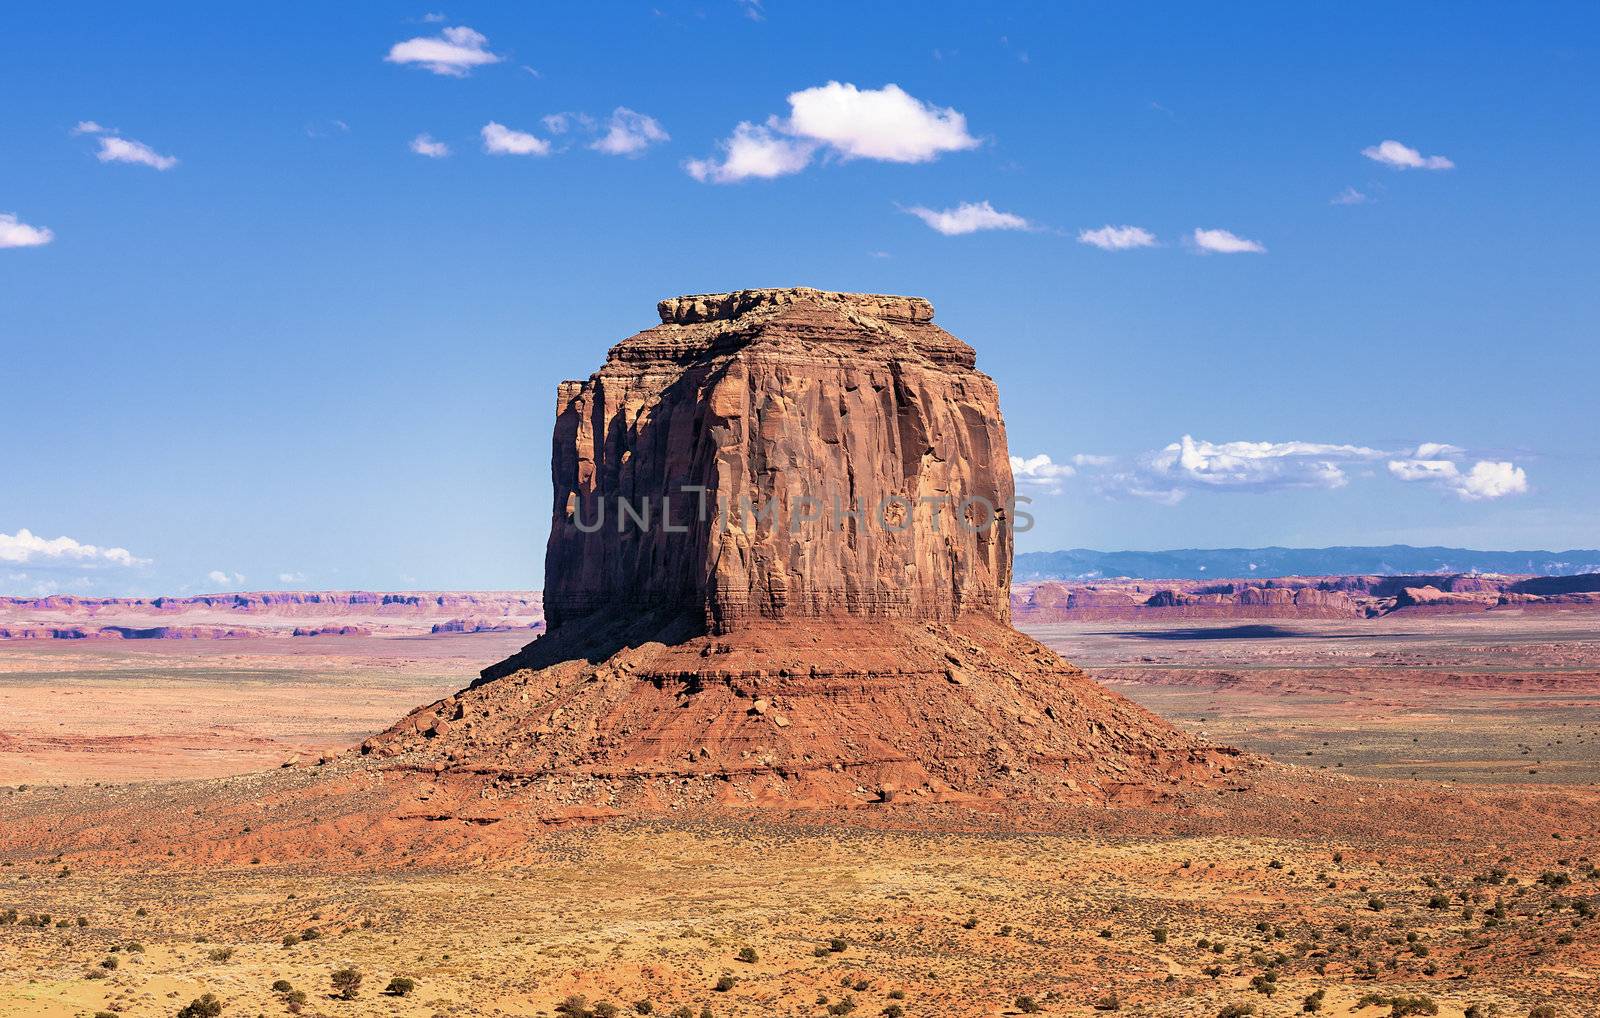 one of the famous rocks at Monument Valley, USA